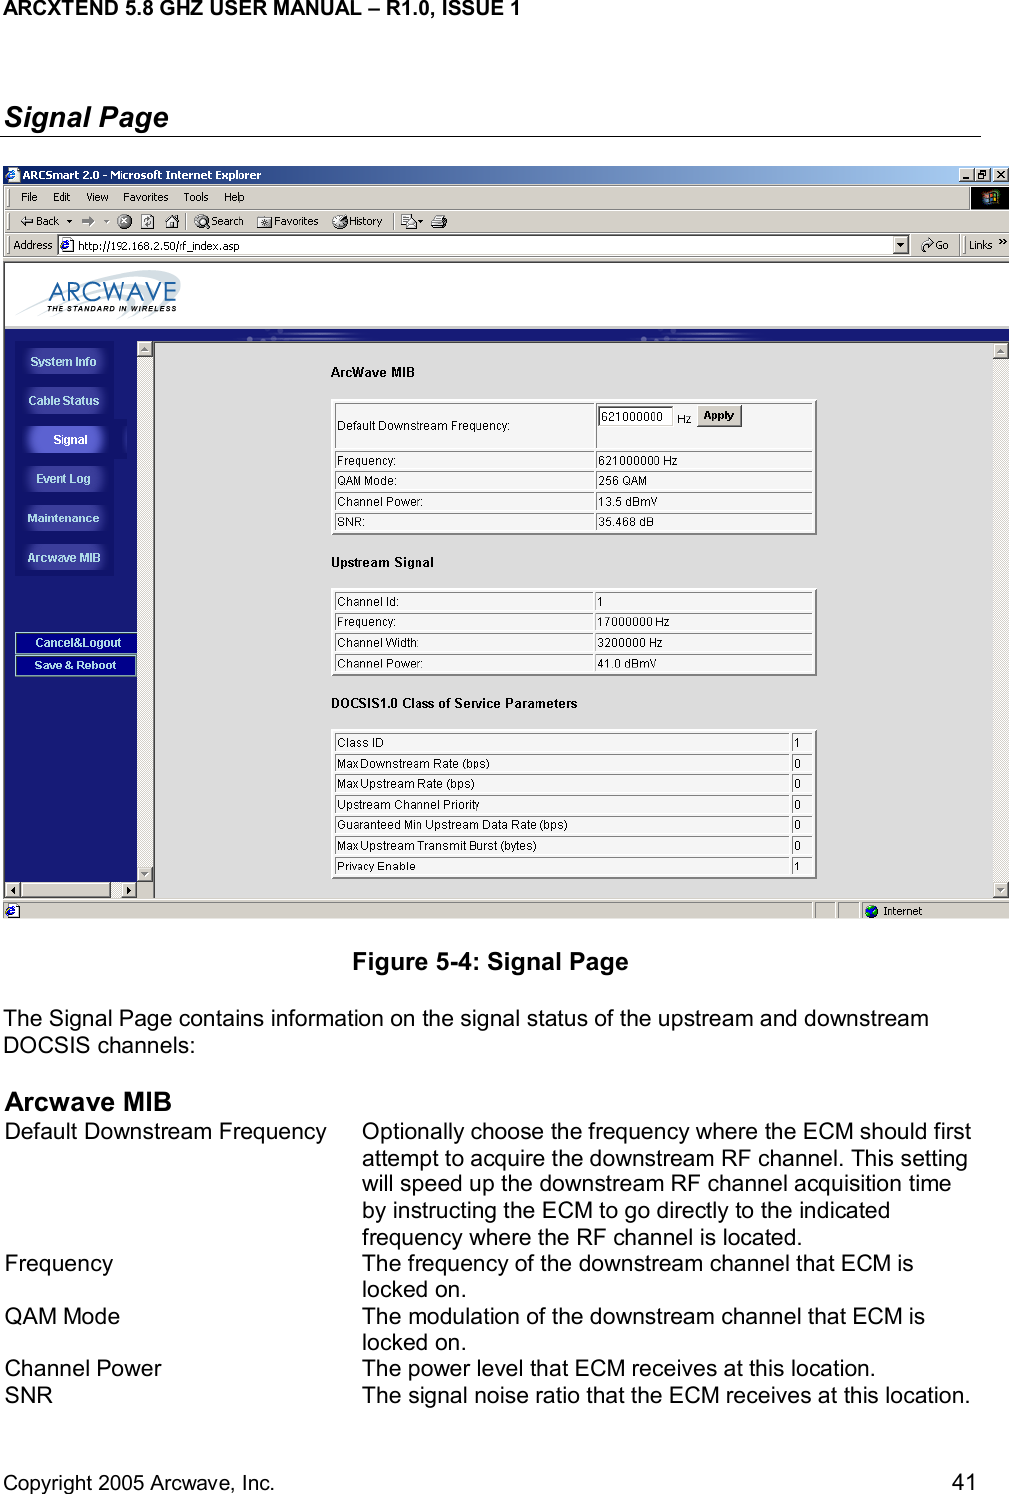 ARCXTEND 5.8 GHZ USER MANUAL – R1.0, ISSUE 1  Copyright 2005 Arcwave, Inc.    41 Signal Page  Figure 5-4: Signal Page The Signal Page contains information on the signal status of the upstream and downstream DOCSIS channels: Arcwave MIB Default Downstream Frequency  Optionally choose the frequency where the ECM should first attempt to acquire the downstream RF channel. This setting will speed up the downstream RF channel acquisition time by instructing the ECM to go directly to the indicated frequency where the RF channel is located.  Frequency  The frequency of the downstream channel that ECM is locked on. QAM Mode  The modulation of the downstream channel that ECM is locked on. Channel Power  The power level that ECM receives at this location. SNR  The signal noise ratio that the ECM receives at this location.